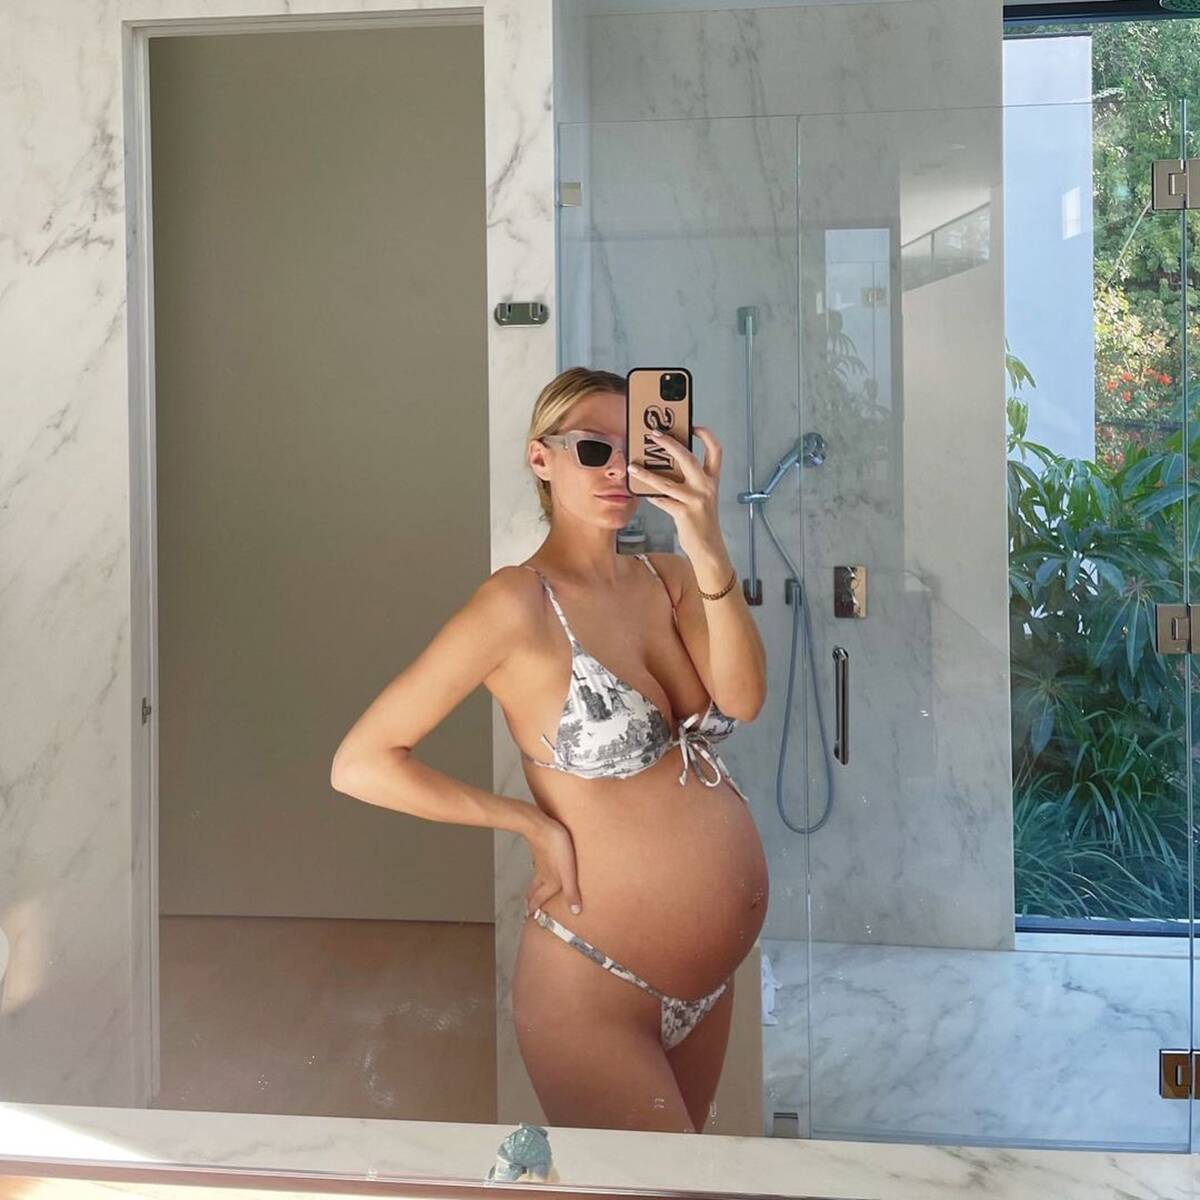 Morgan Stewart Poses Nude to Celebrate Her Last Month of Pregnancy